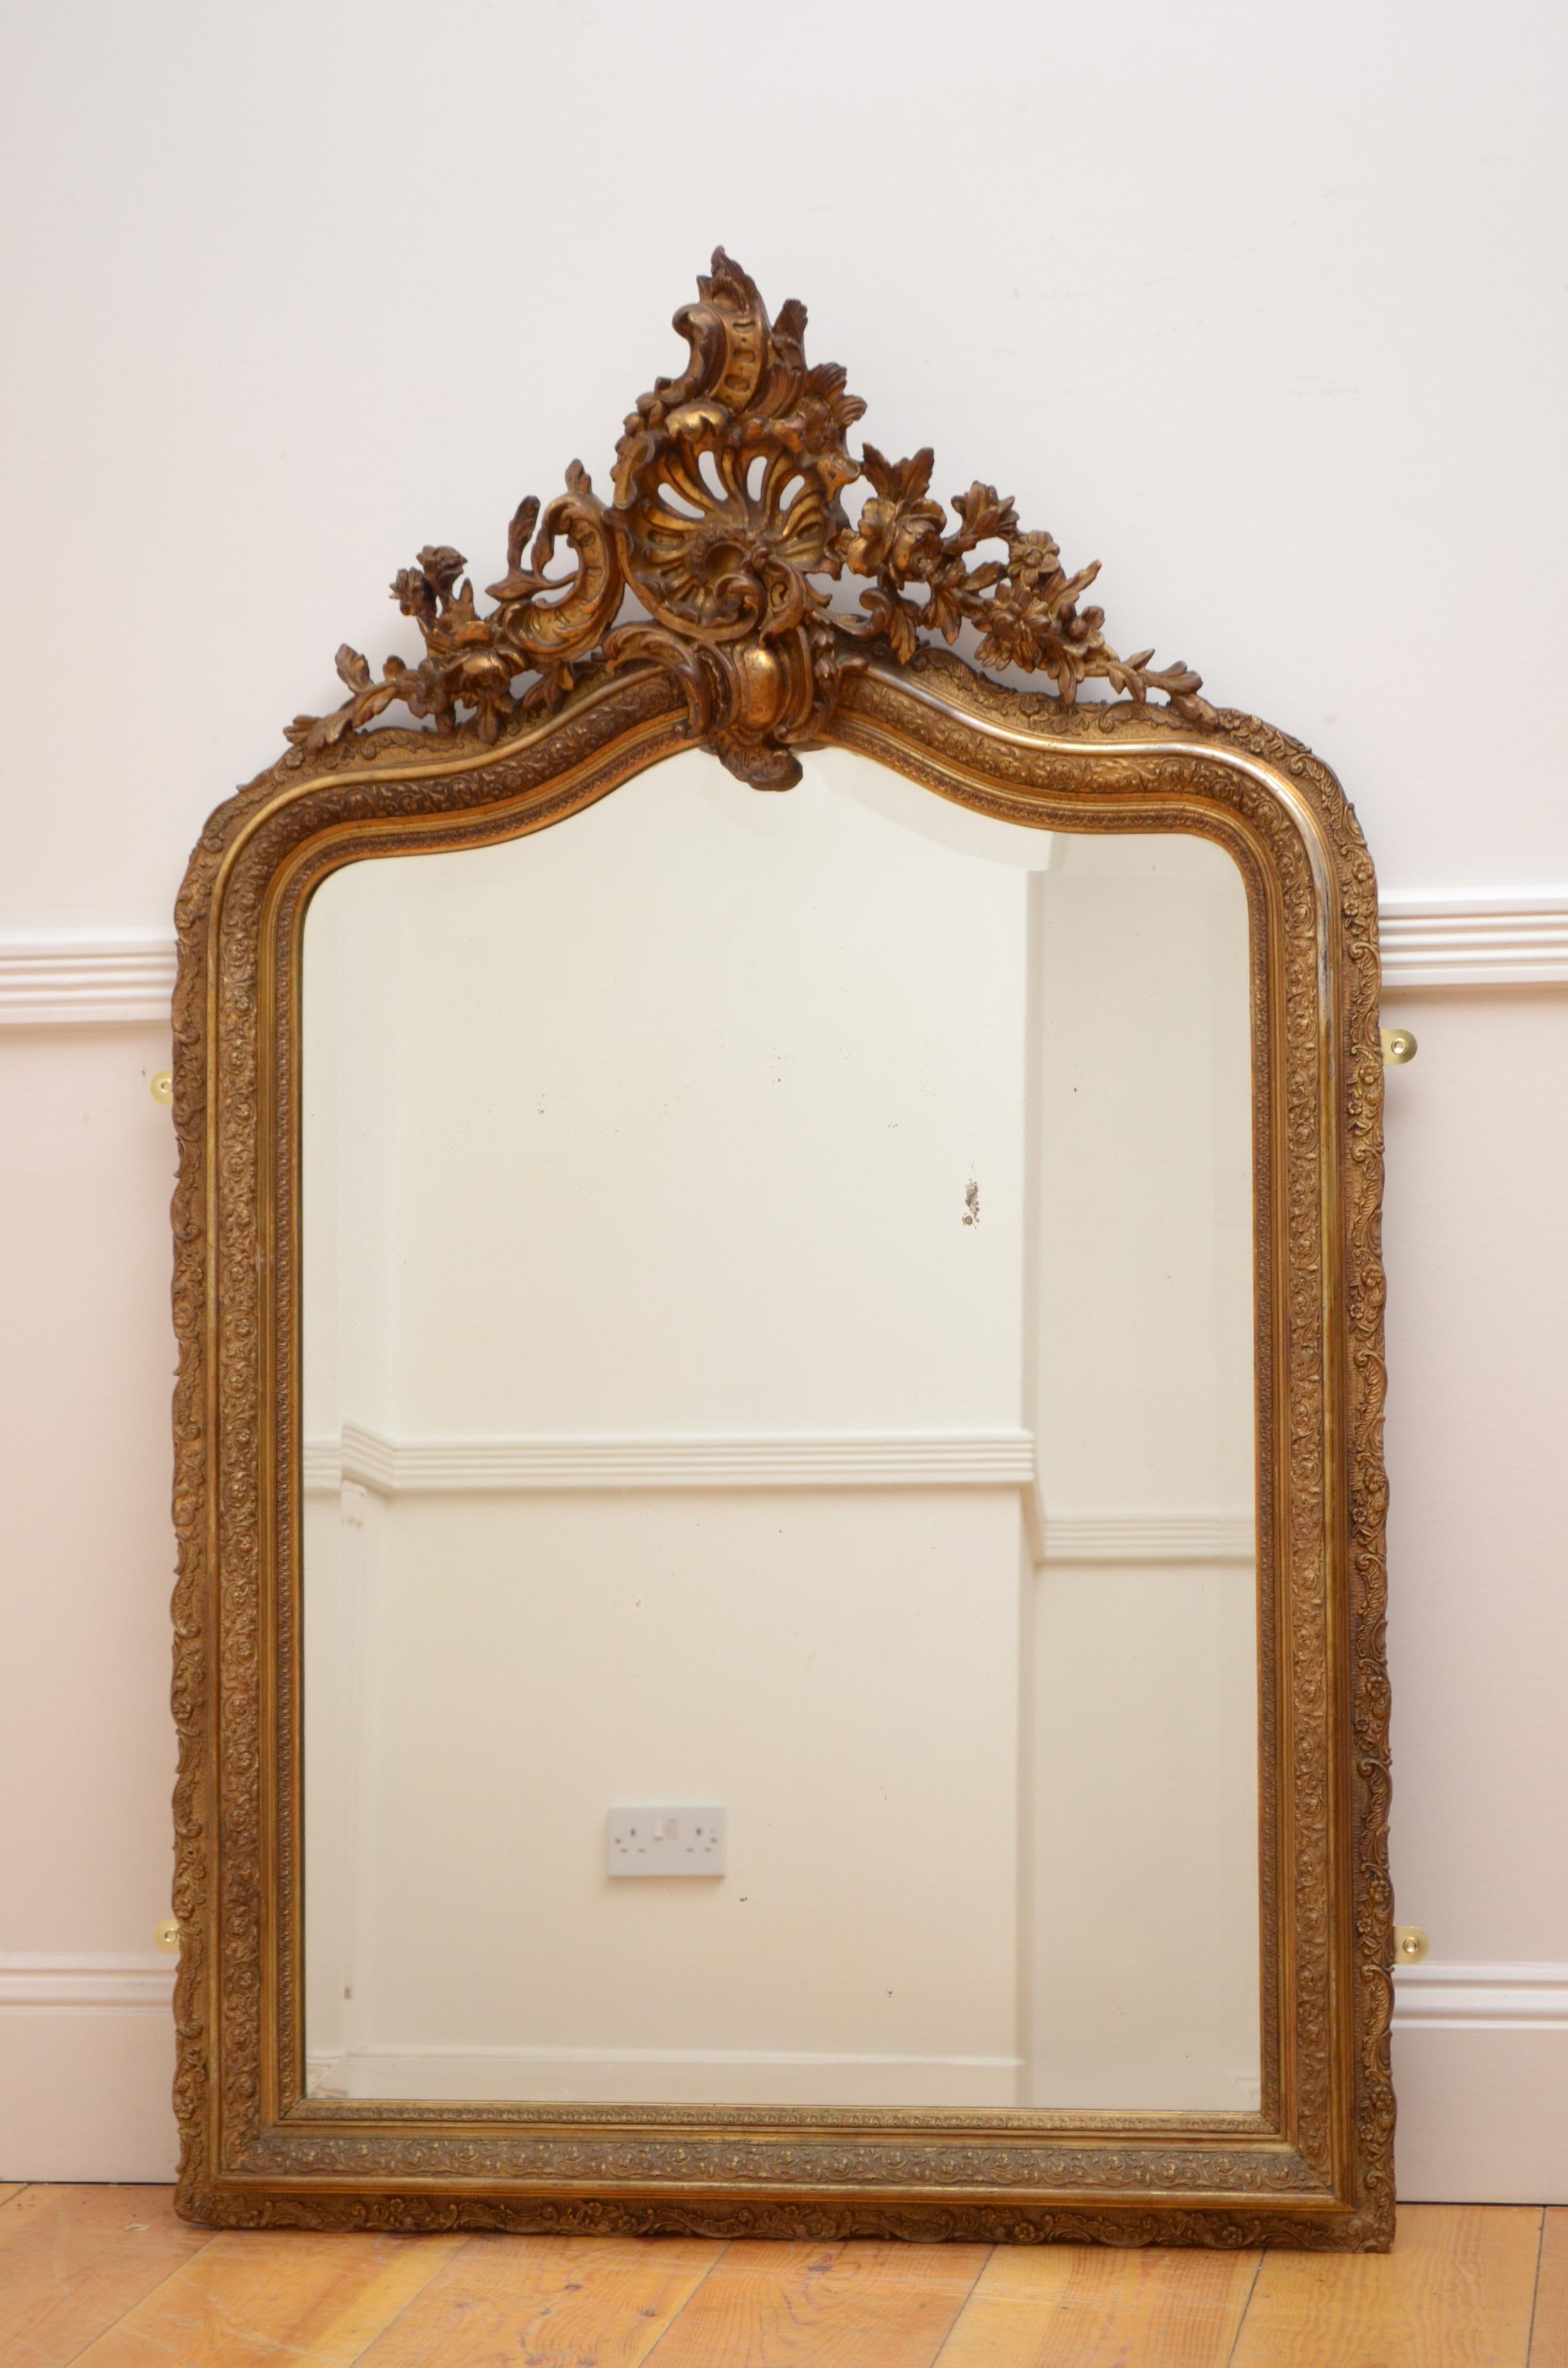 K0445 stunning antique French wall mirror with original bevelled edge glass with some foxing in beautifully carved and very elaborate gold leaf frame with exquisite centre crest to the top. This antique mirror retains its original glass, original